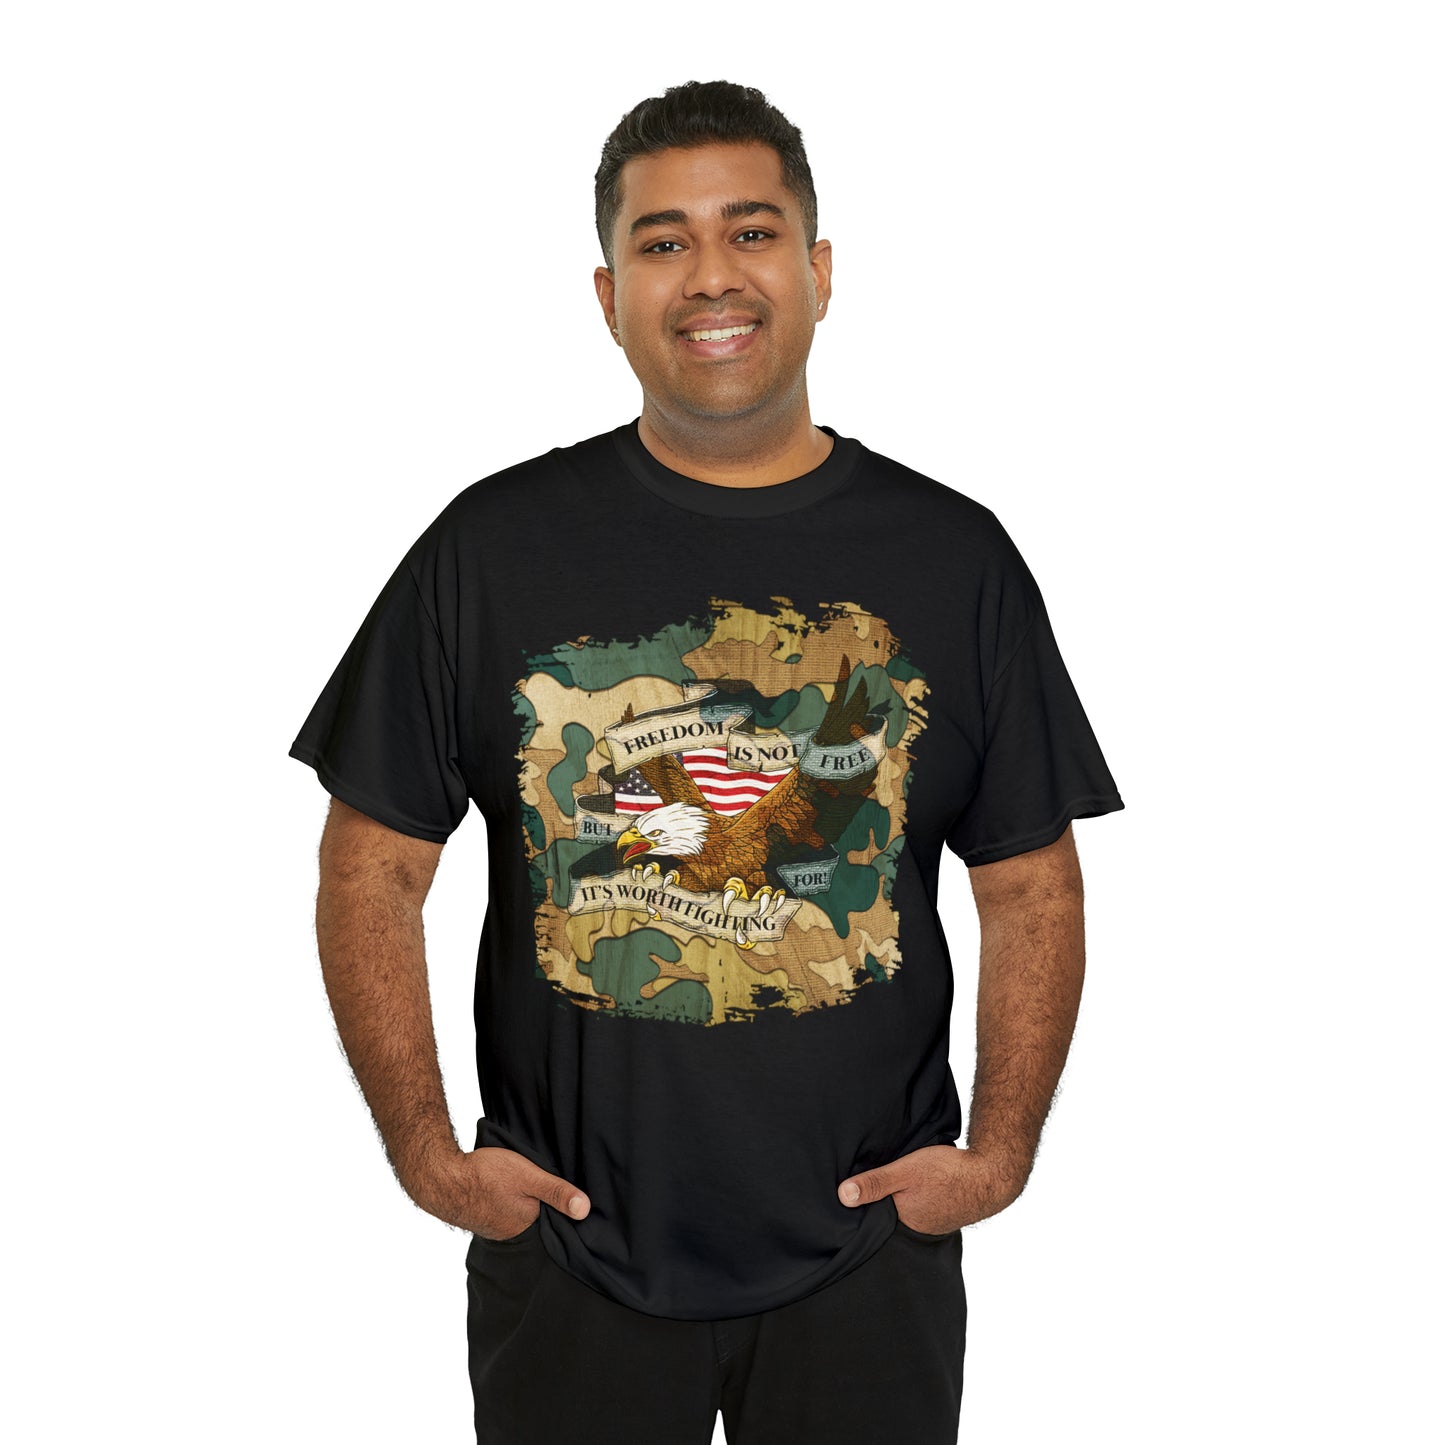 "Freedom Is Not Free" T-Shirt - Weave Got Gifts - Unique Gifts You Won’t Find Anywhere Else!